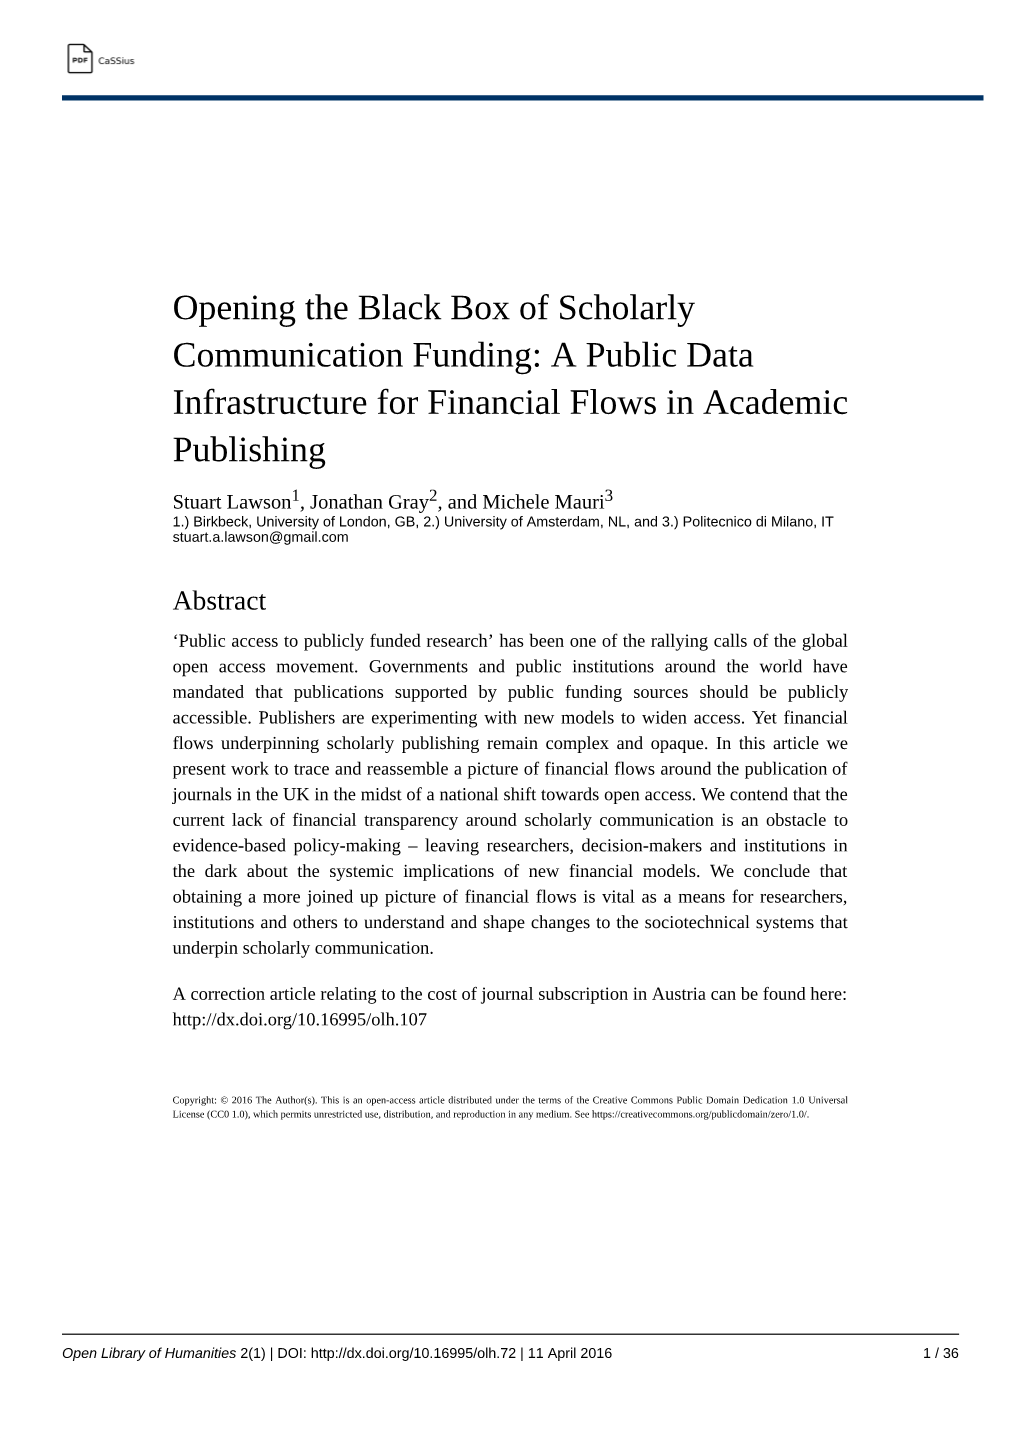 Opening the Black Box of Scholarly Communication Funding: a Public Data Infrastructure for Financial Flows in Academic Publishing